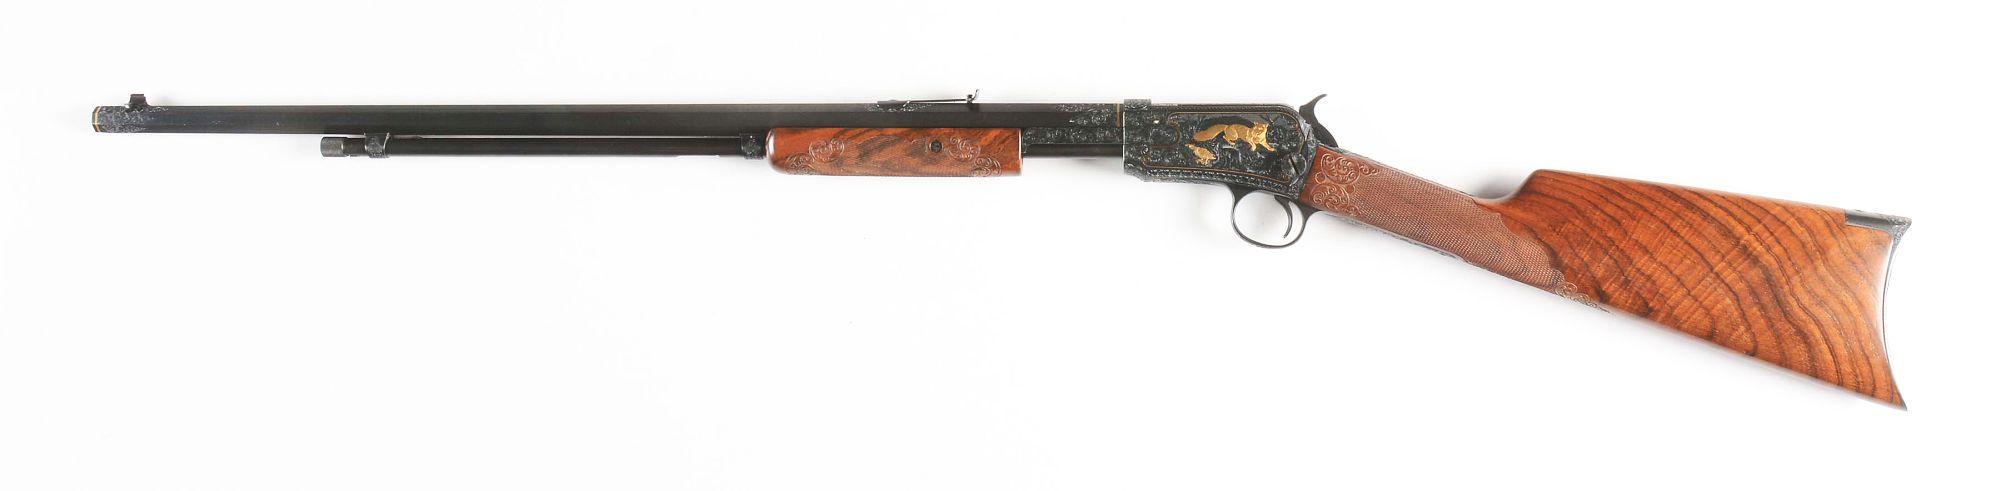 (C) WINCHESTER 1890 SLIDE ACTION RIFLE.